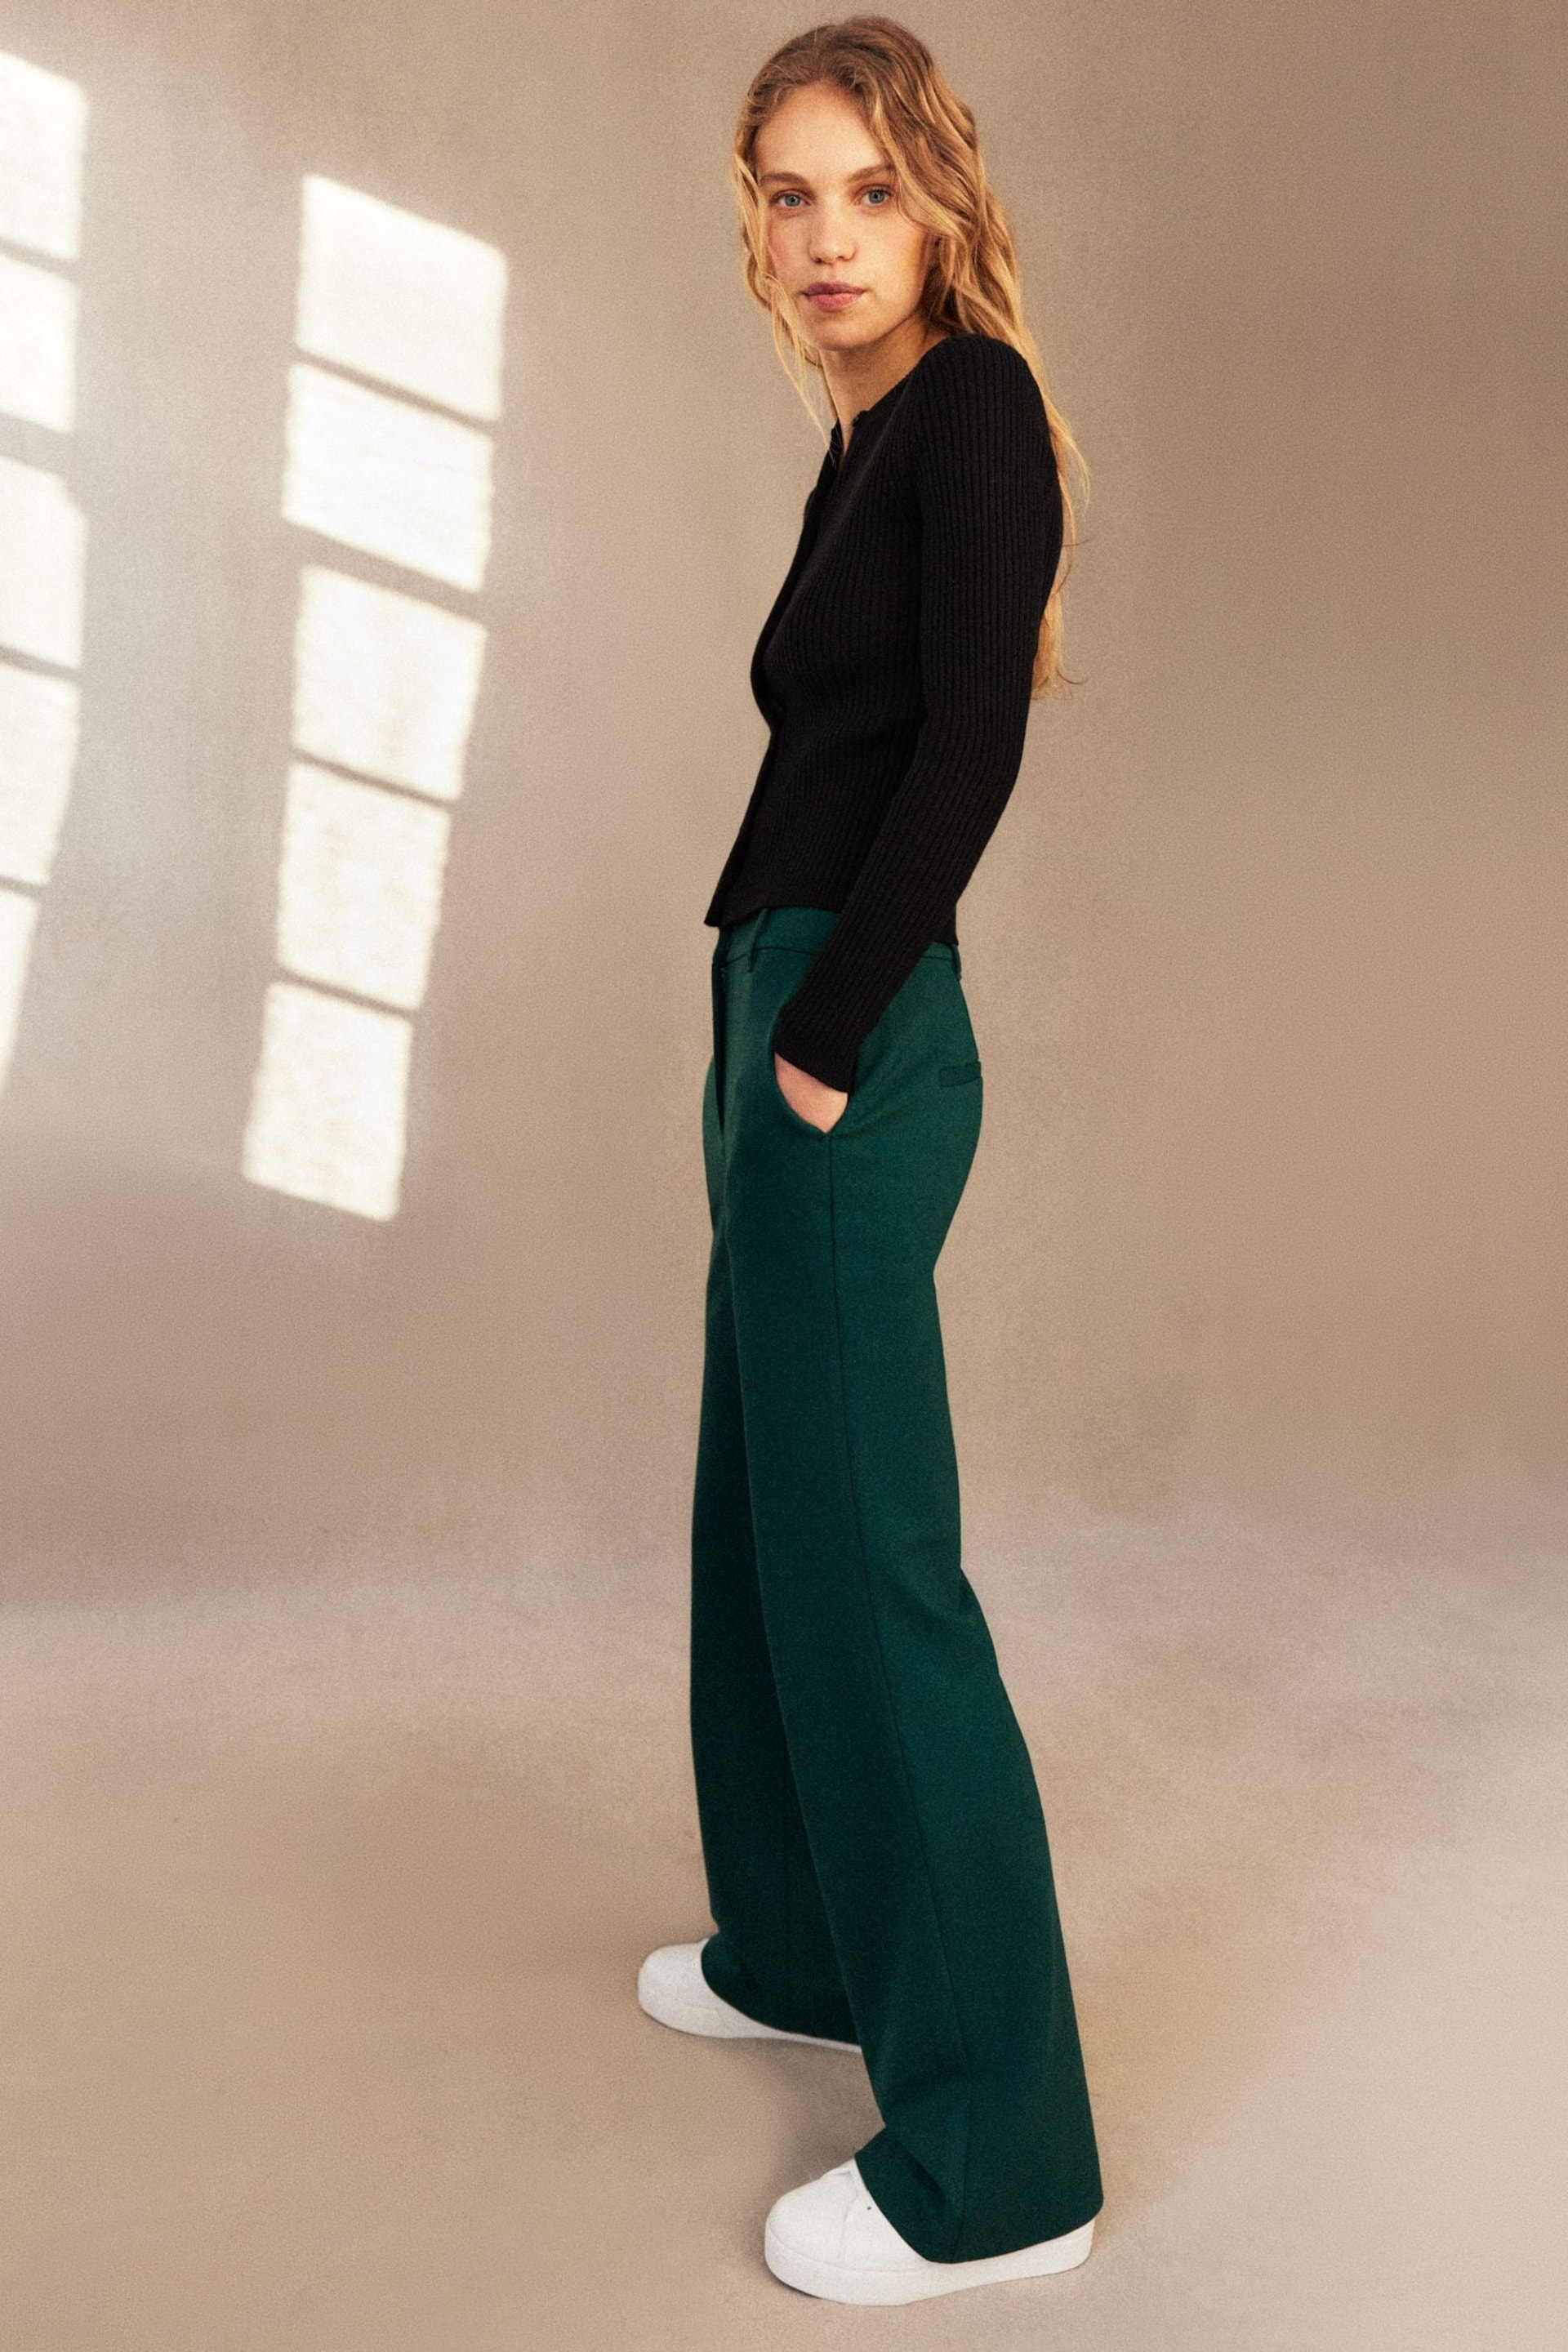 Boden Green Ponte Flare Trousers - Image 2 of 3